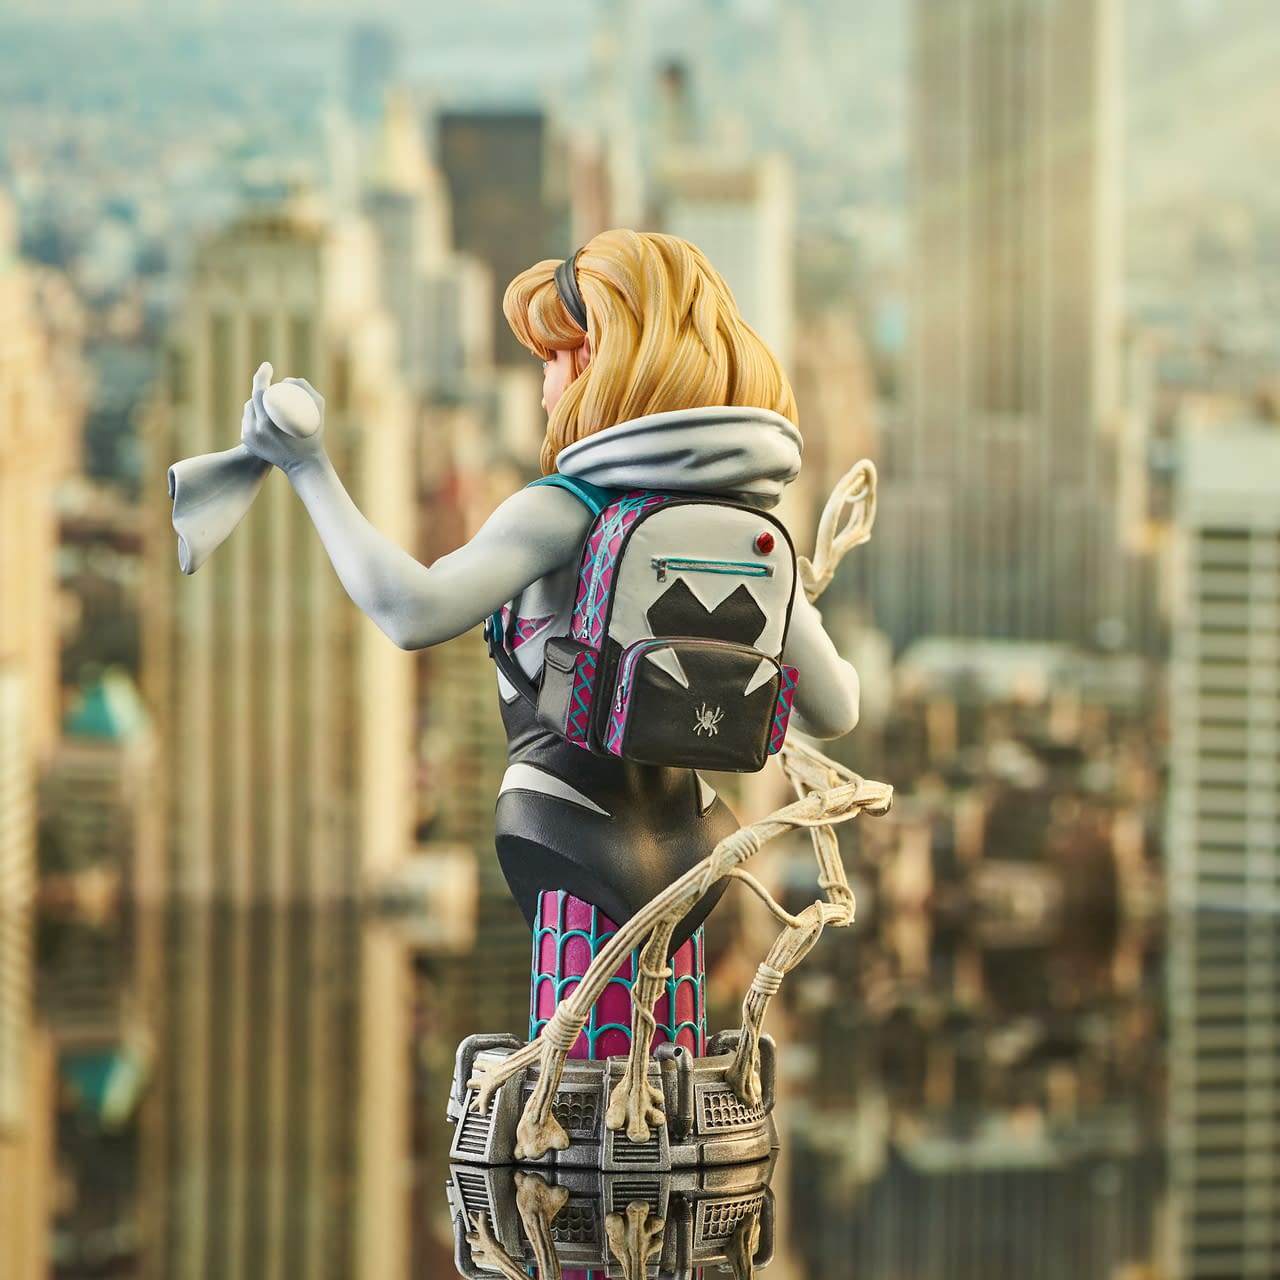 Spider-Gwen Gets a Limited Edition Statue from Diamond Select Toys